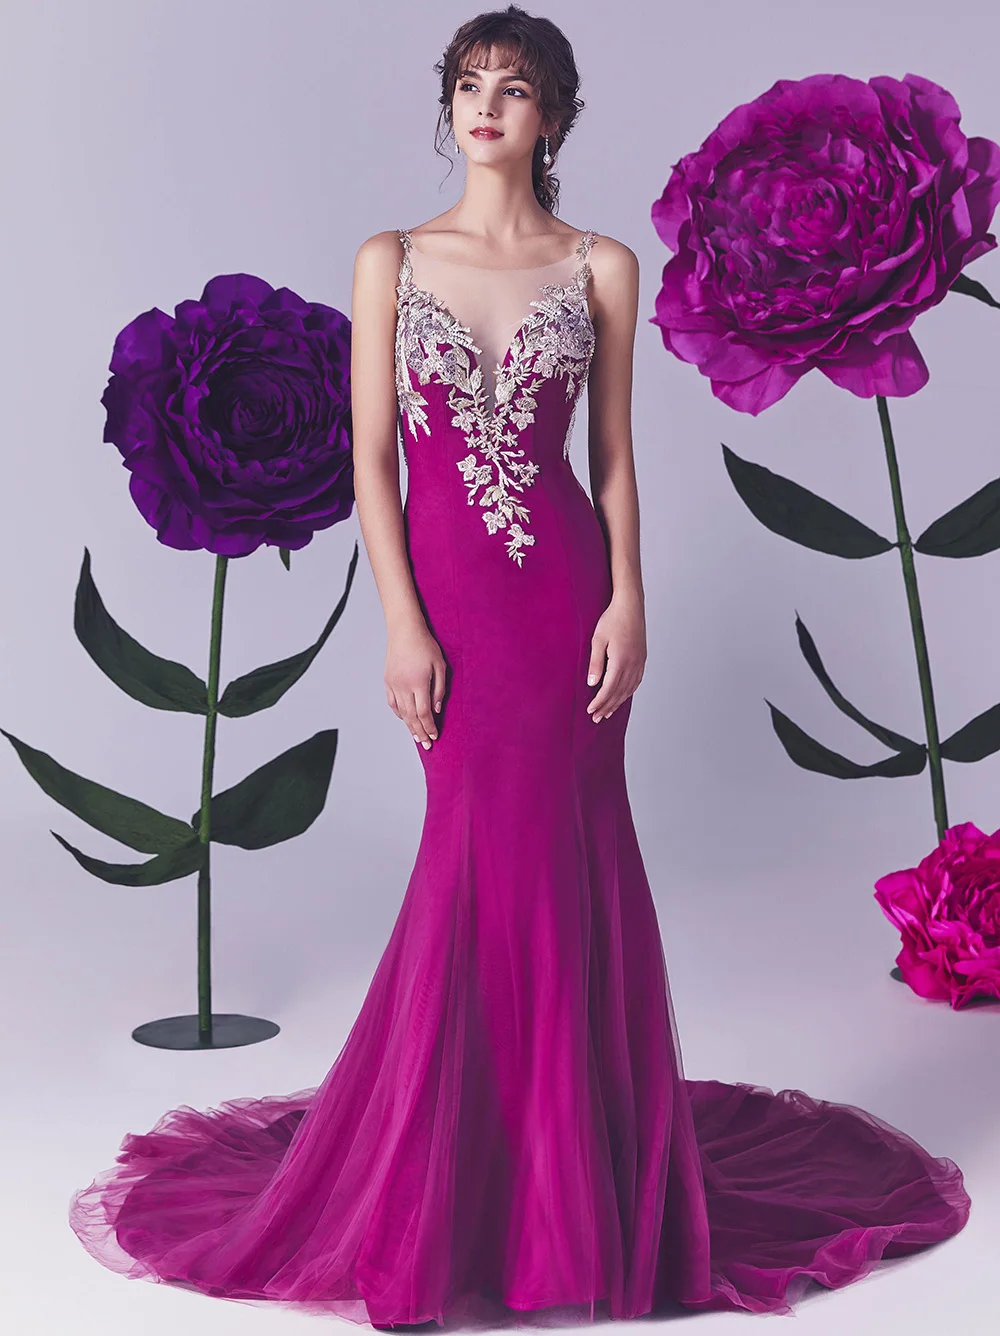 

Formal Evening Dresses Trumpet Jewel Sleeveless Floor-Length Sweep Train Applique Sequins Crystal Beaded Tulle Backless Illusion